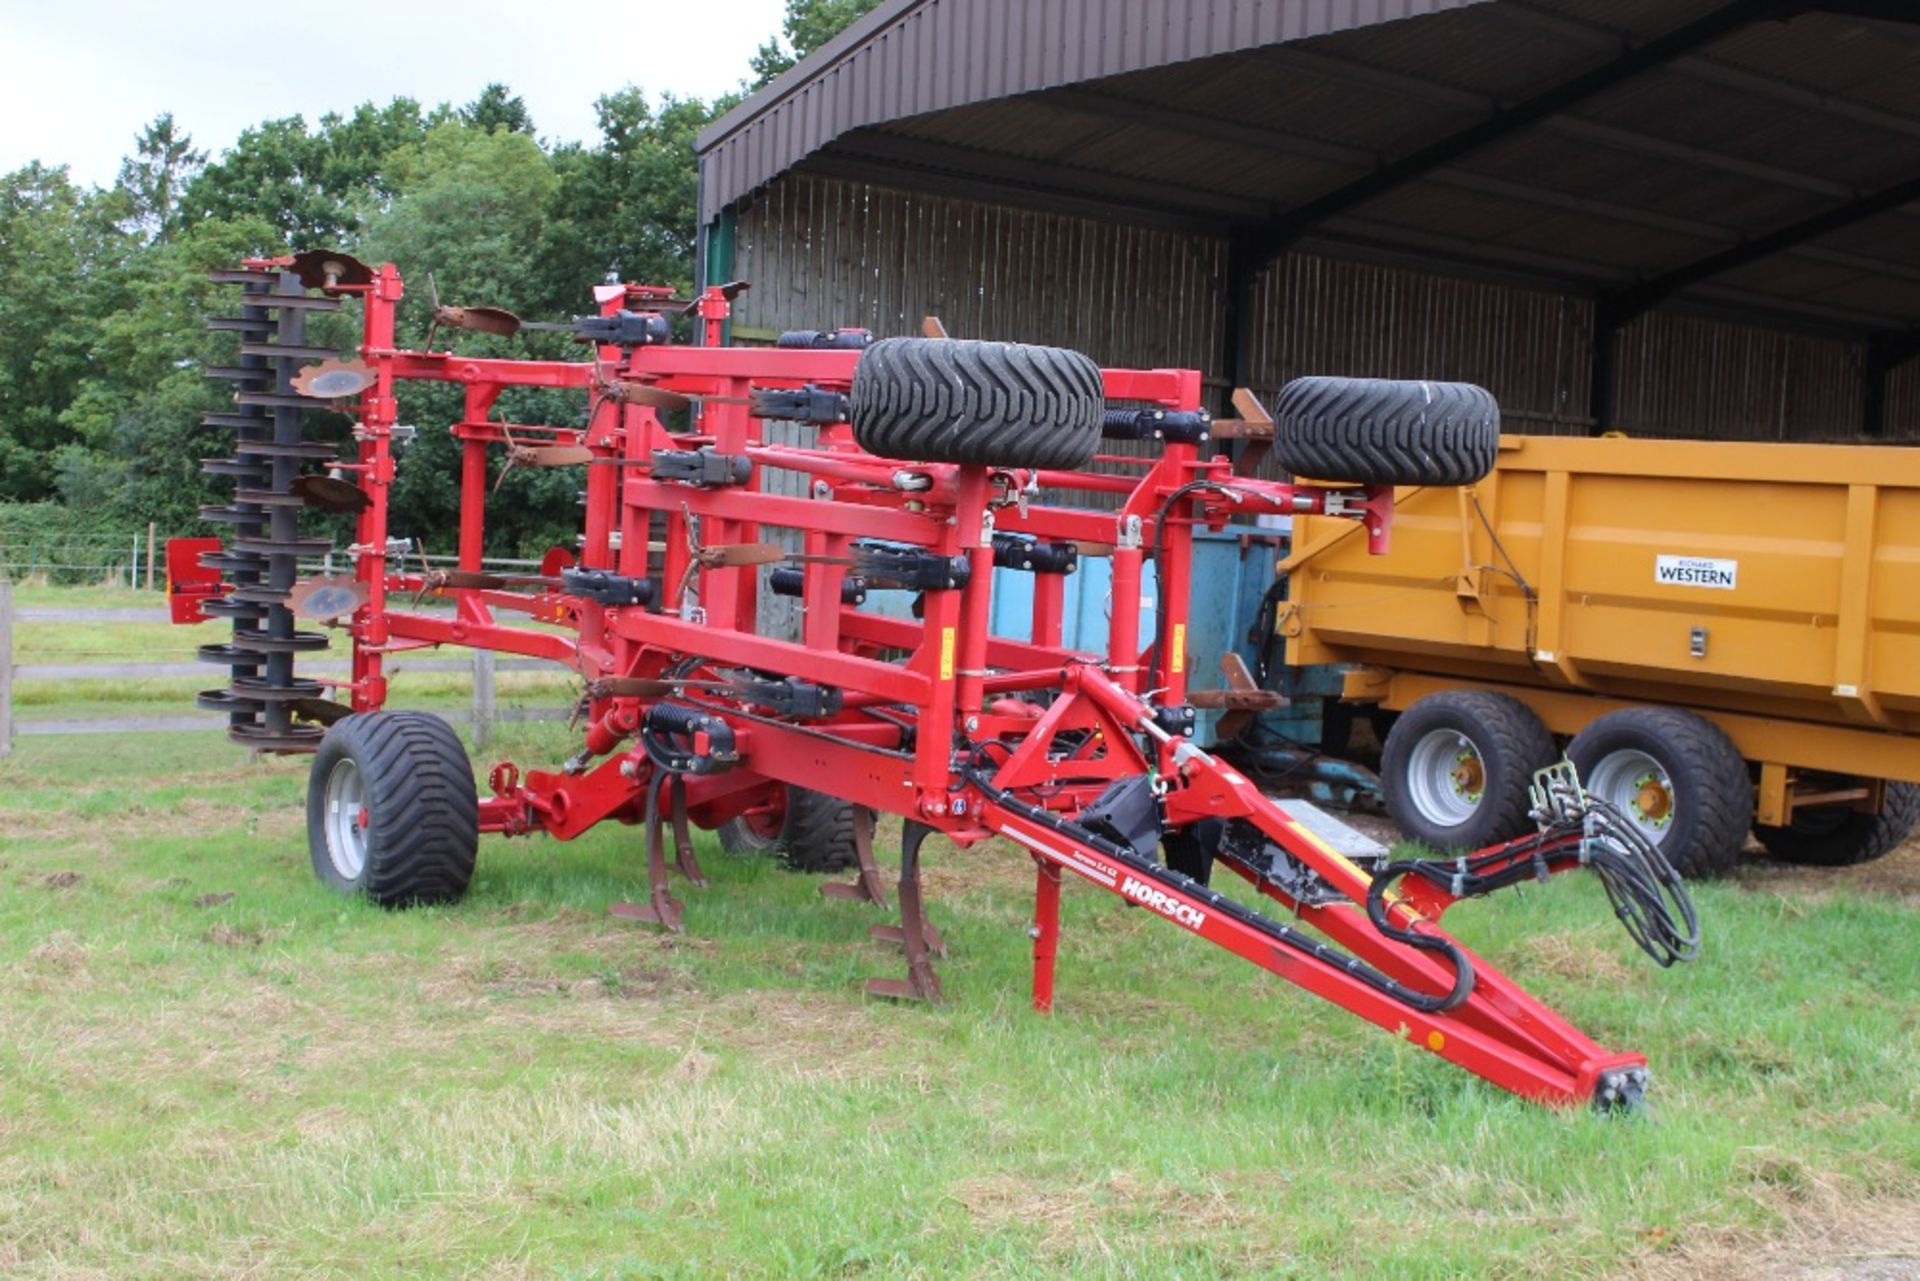 Horsch Terrano 5.4GX 5.4m hydraulic folding trailed cultivator. 2018. Serial number 34981289. With - Image 41 of 43